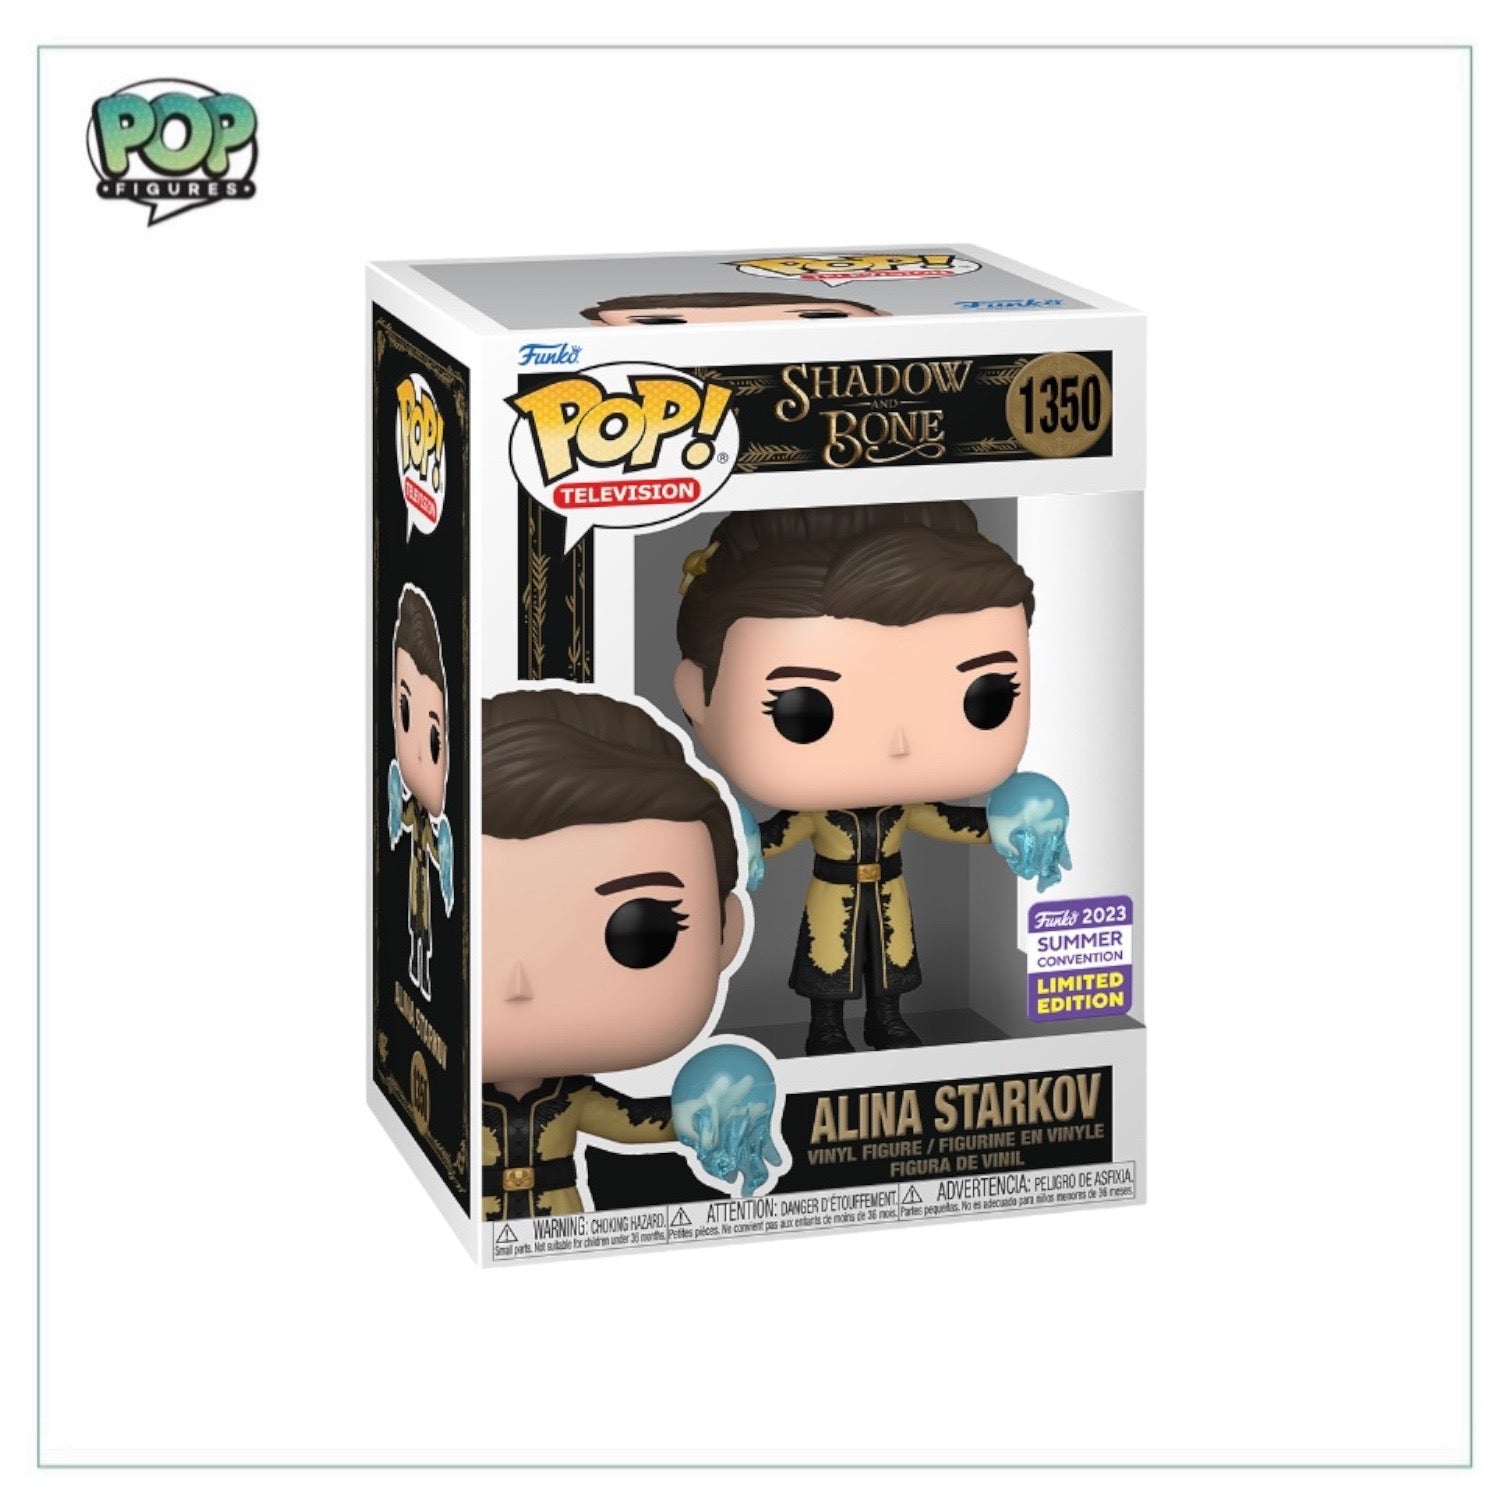 Alina Starkov #1350 Funko Pop! - Shadow and Bone - SDCC 2023 Shared Exclusive - Angry Cat